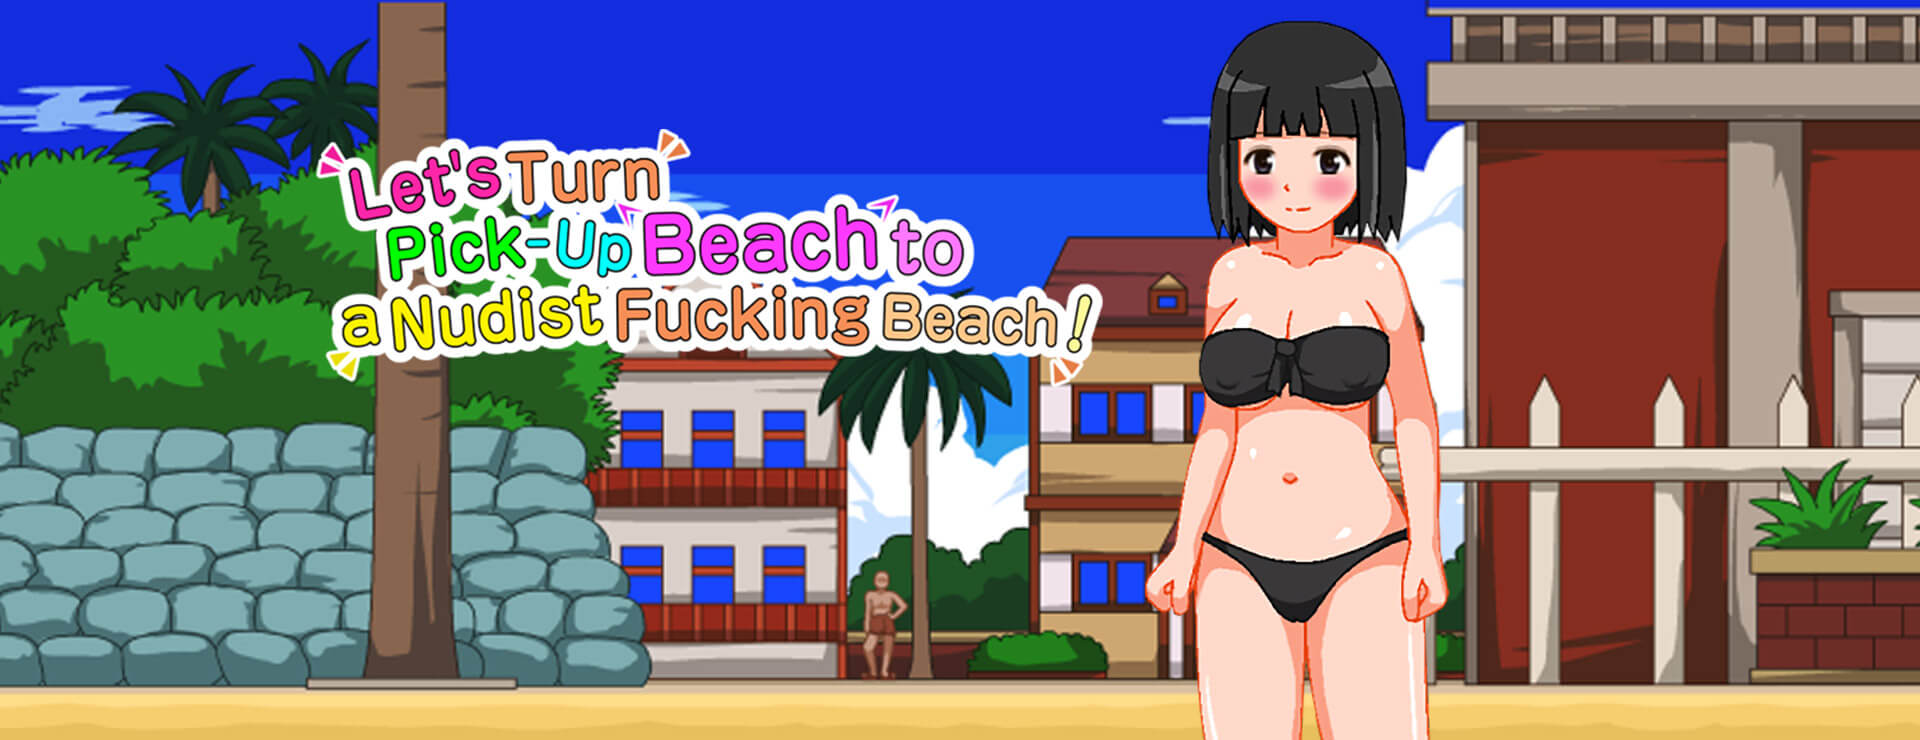 Let’s Turn Pick-Up Beach to a Nudist Fucking Beach!! - Simulation Spiel